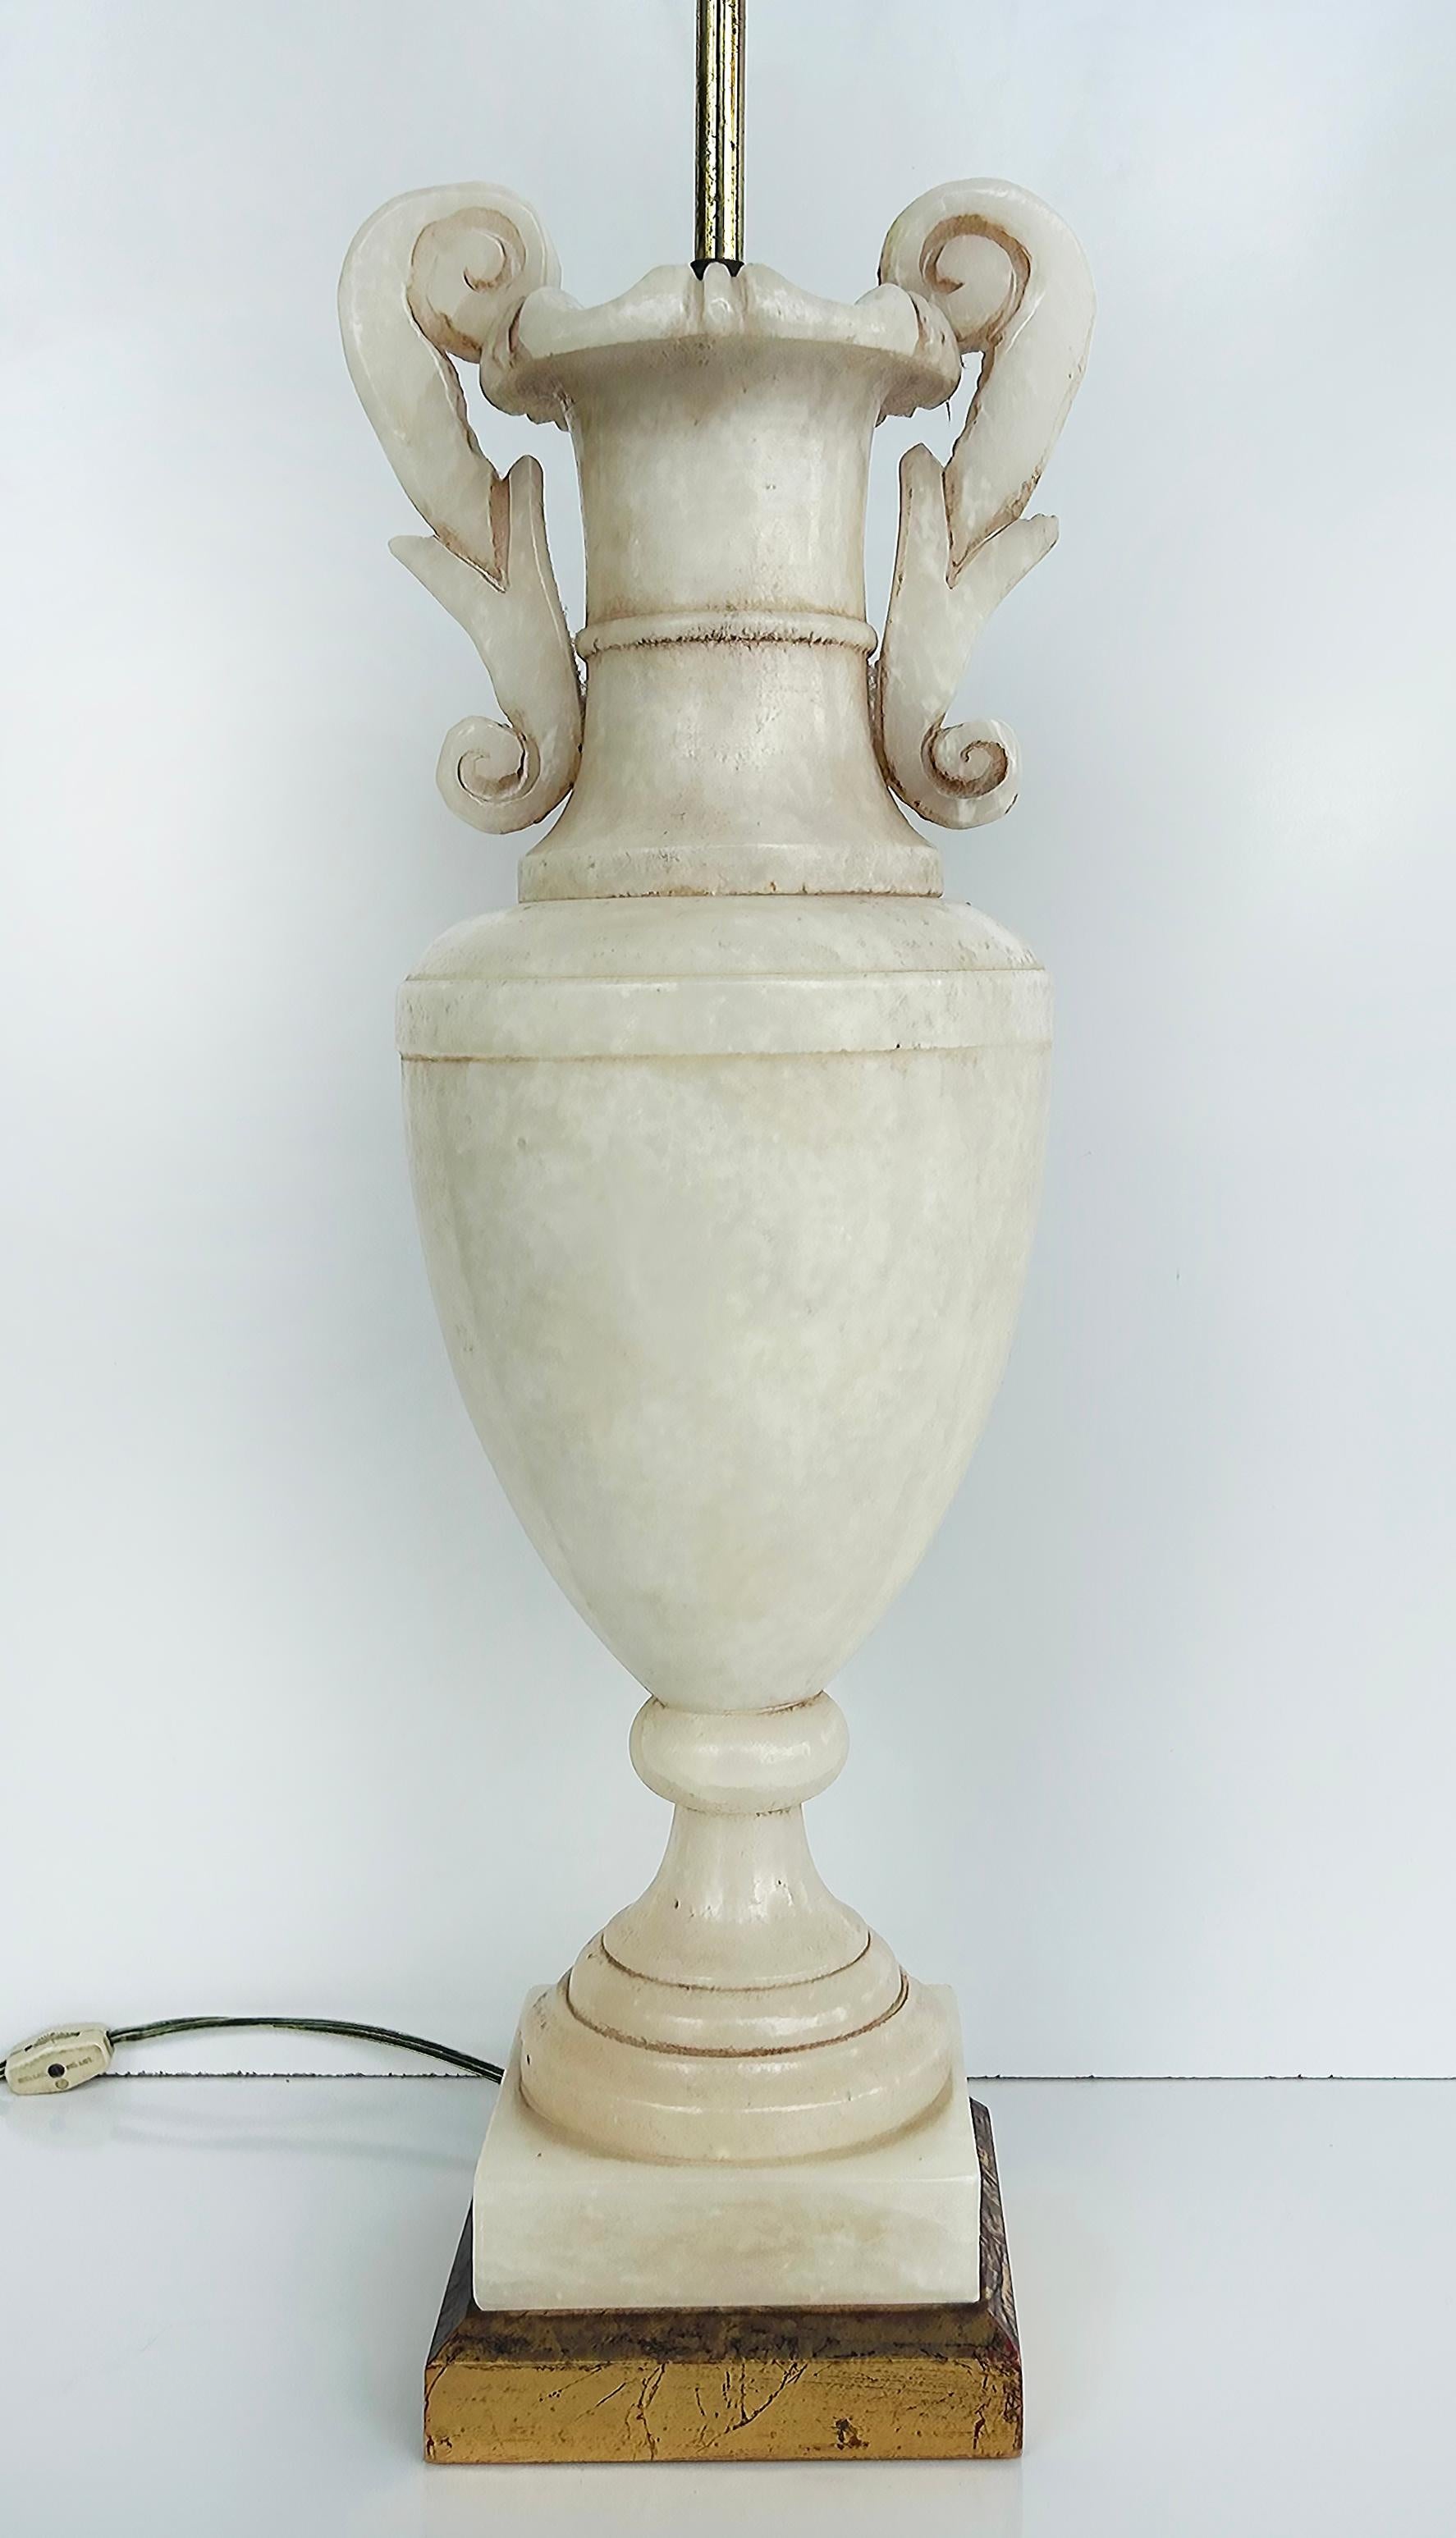 Hand-Carved Monumental Alabaster Urn Table Lamps with Interior Lighting, Wired and Working For Sale